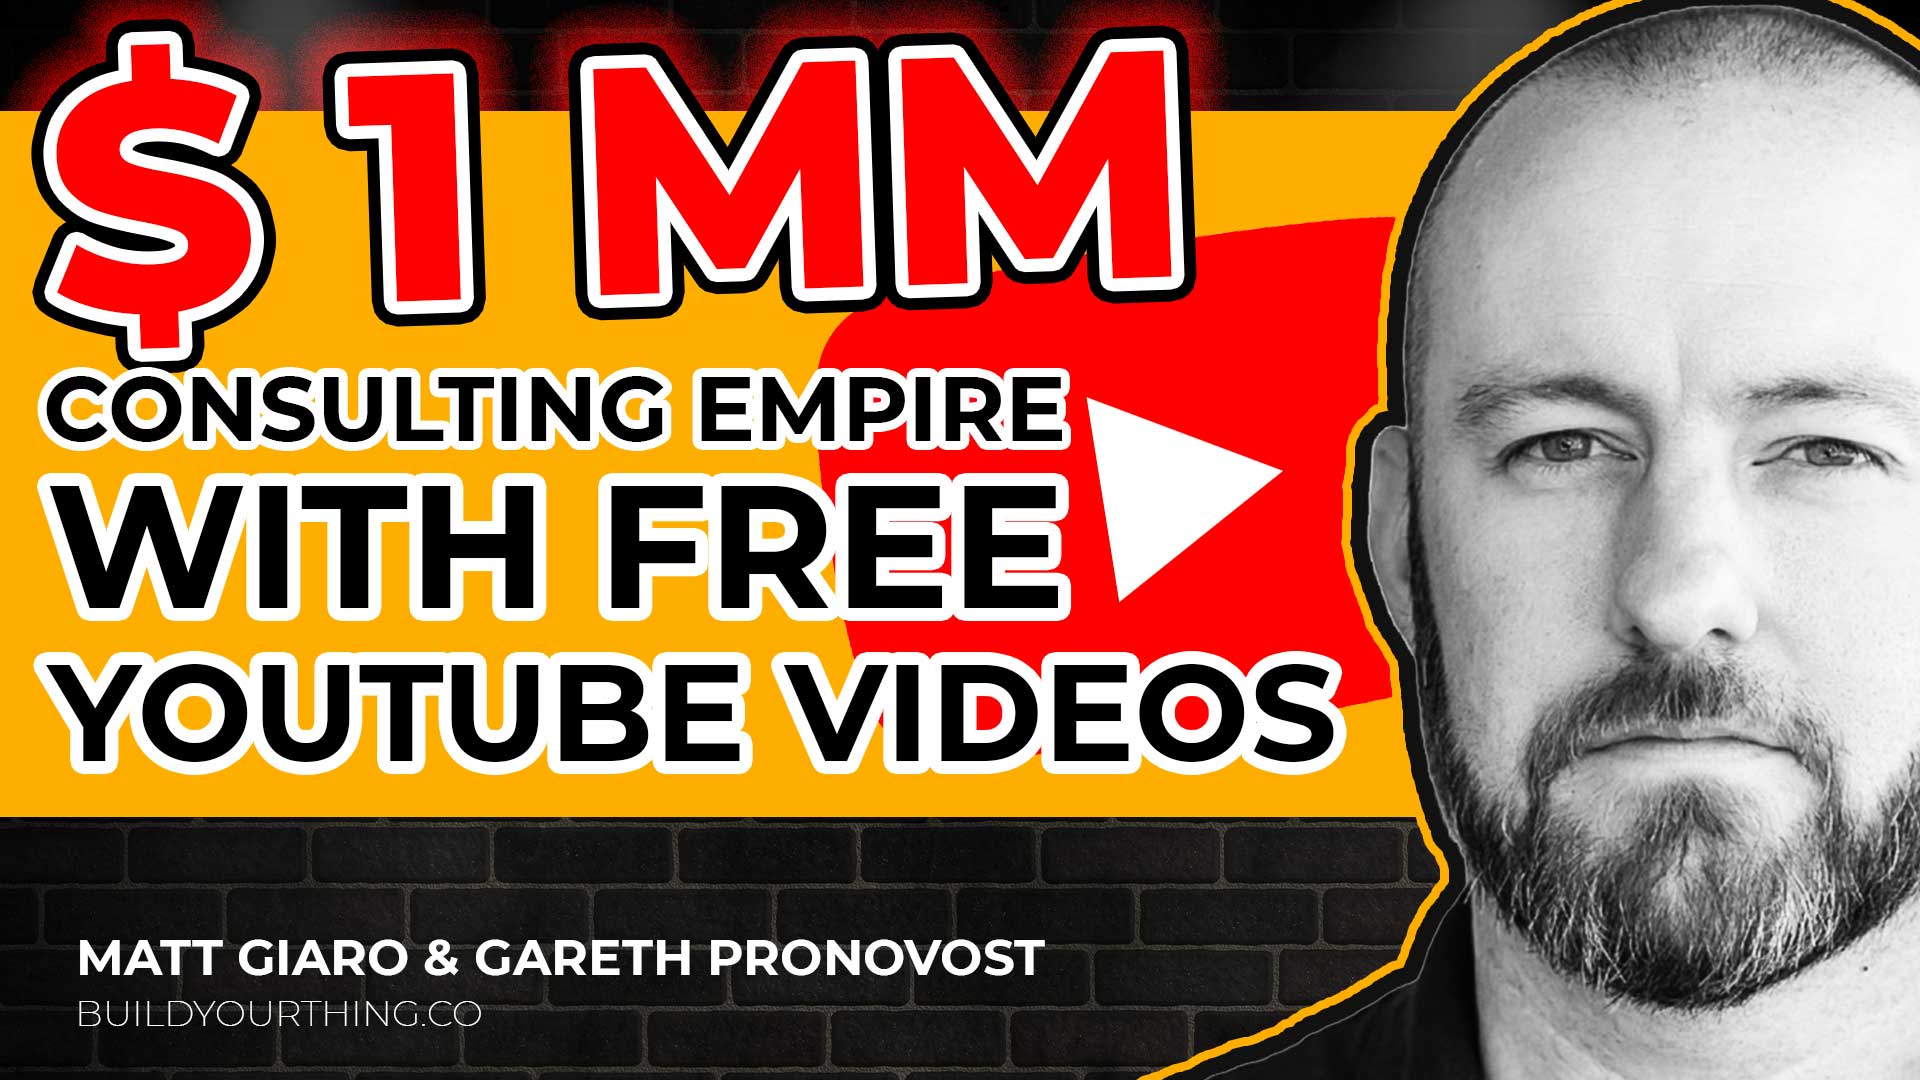 How to Build a 1MM Business With Free Youtube Videos With Gareth Pronovost